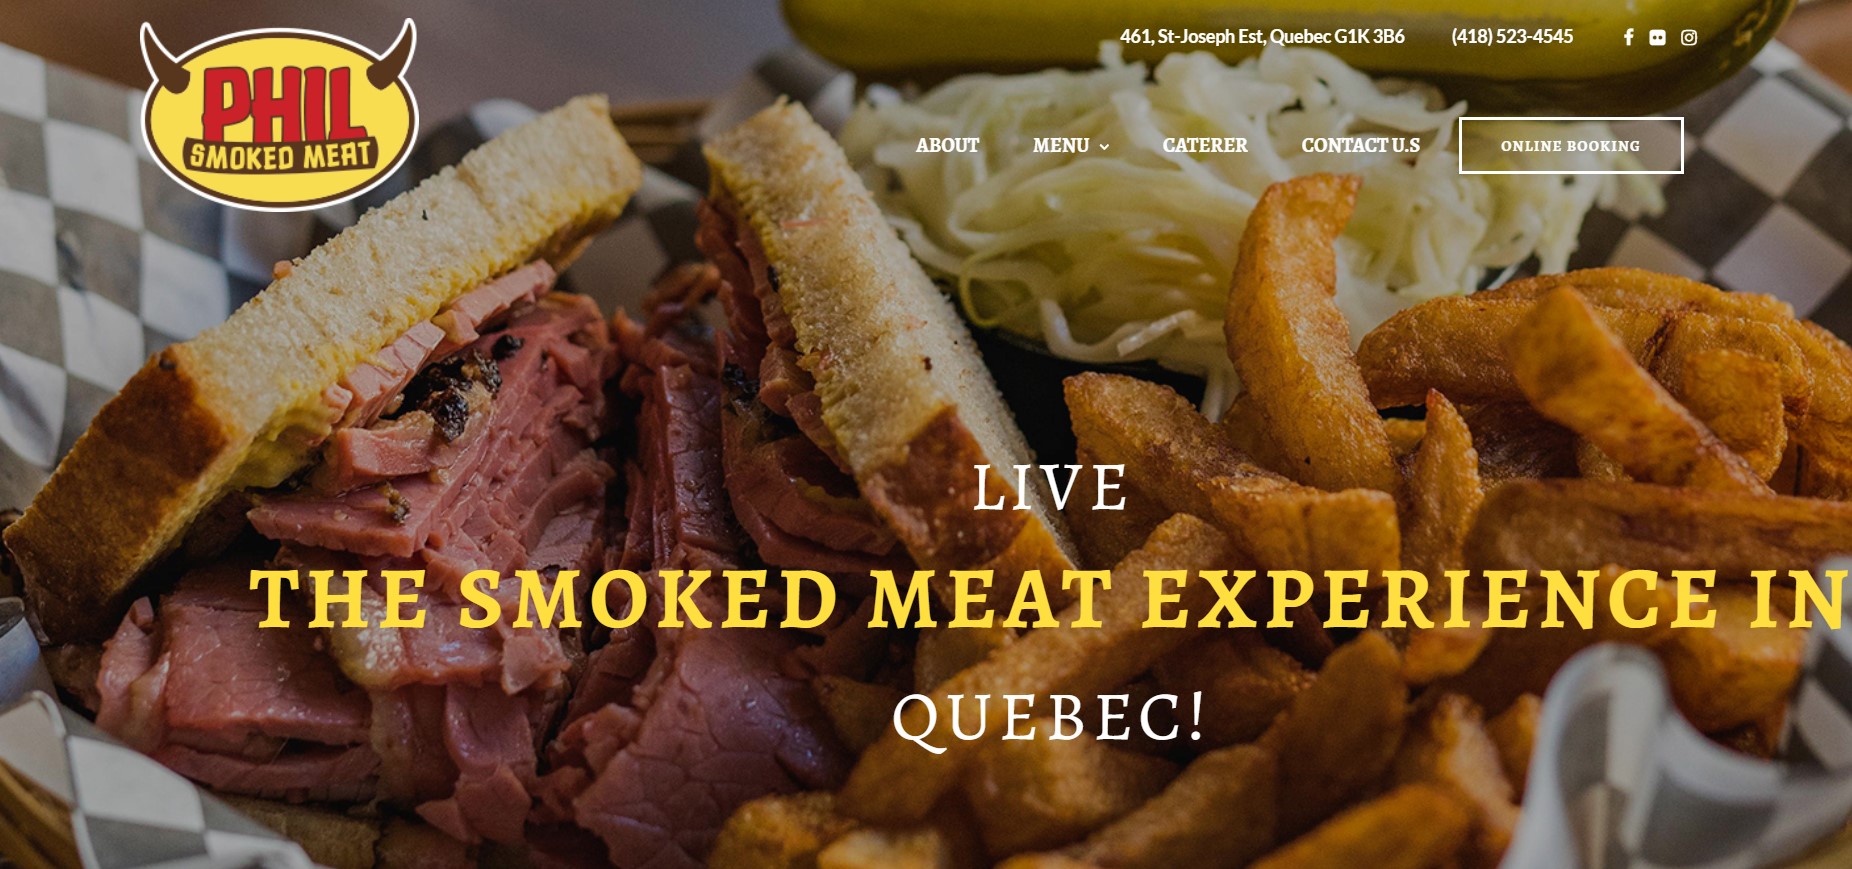 phil smoked meat sandwich shop in quebec